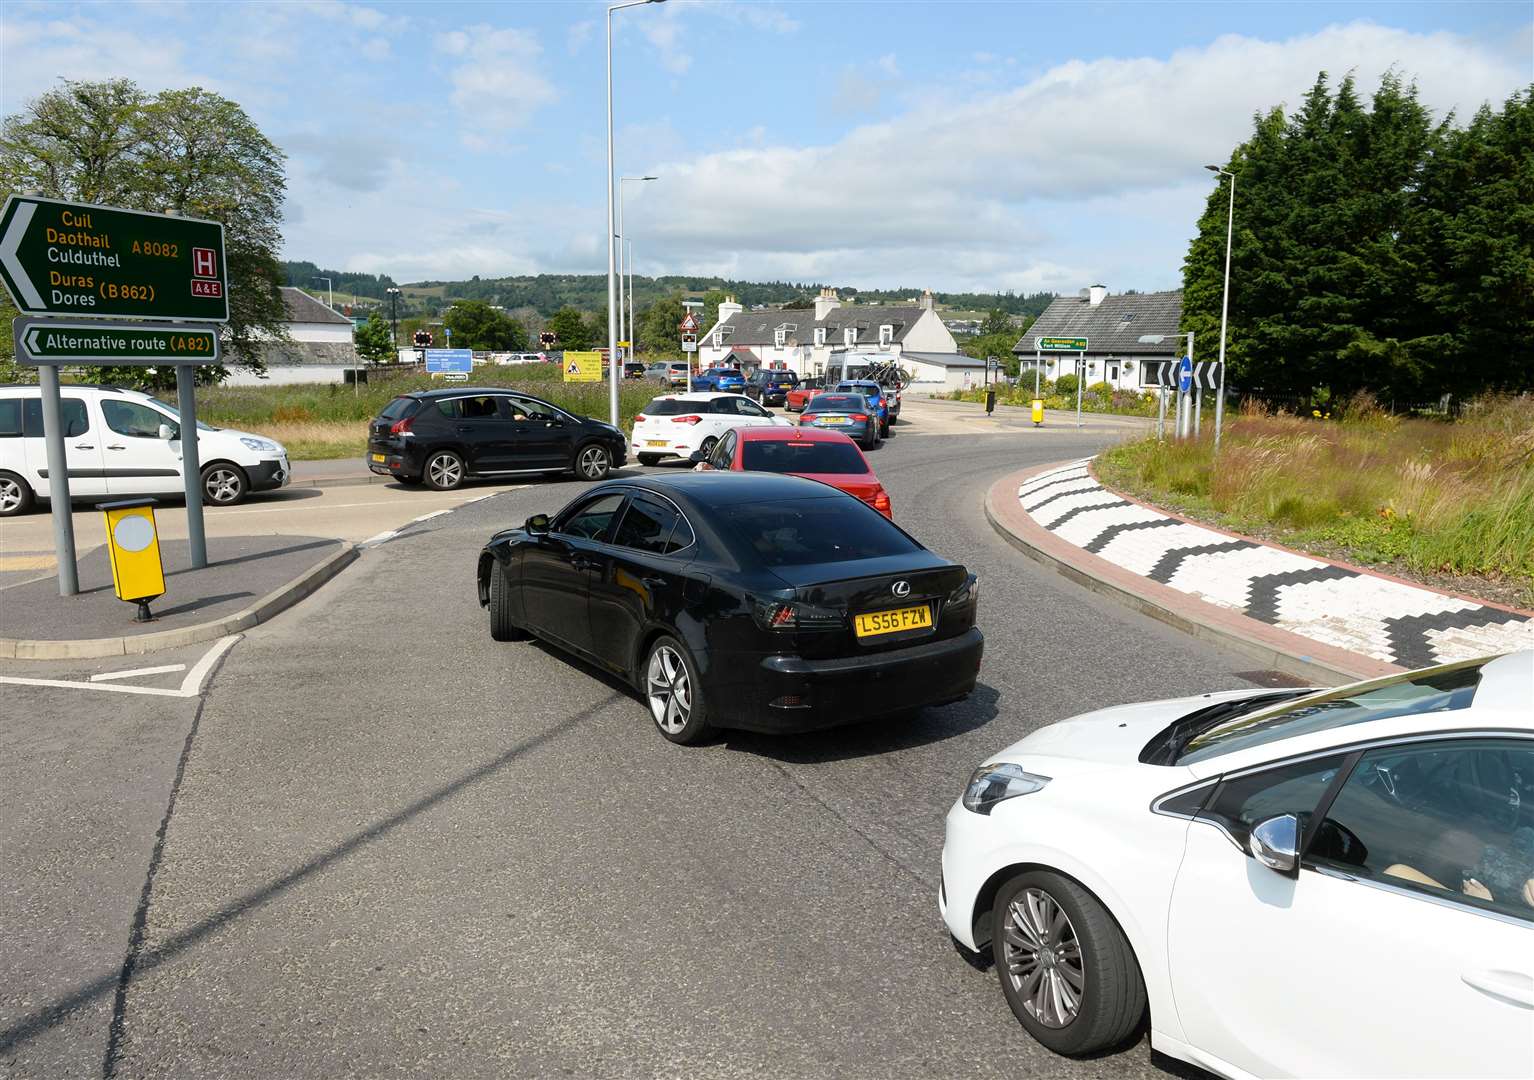 Tailbacks form as motorists have to wait. Picture: Gary Anthony